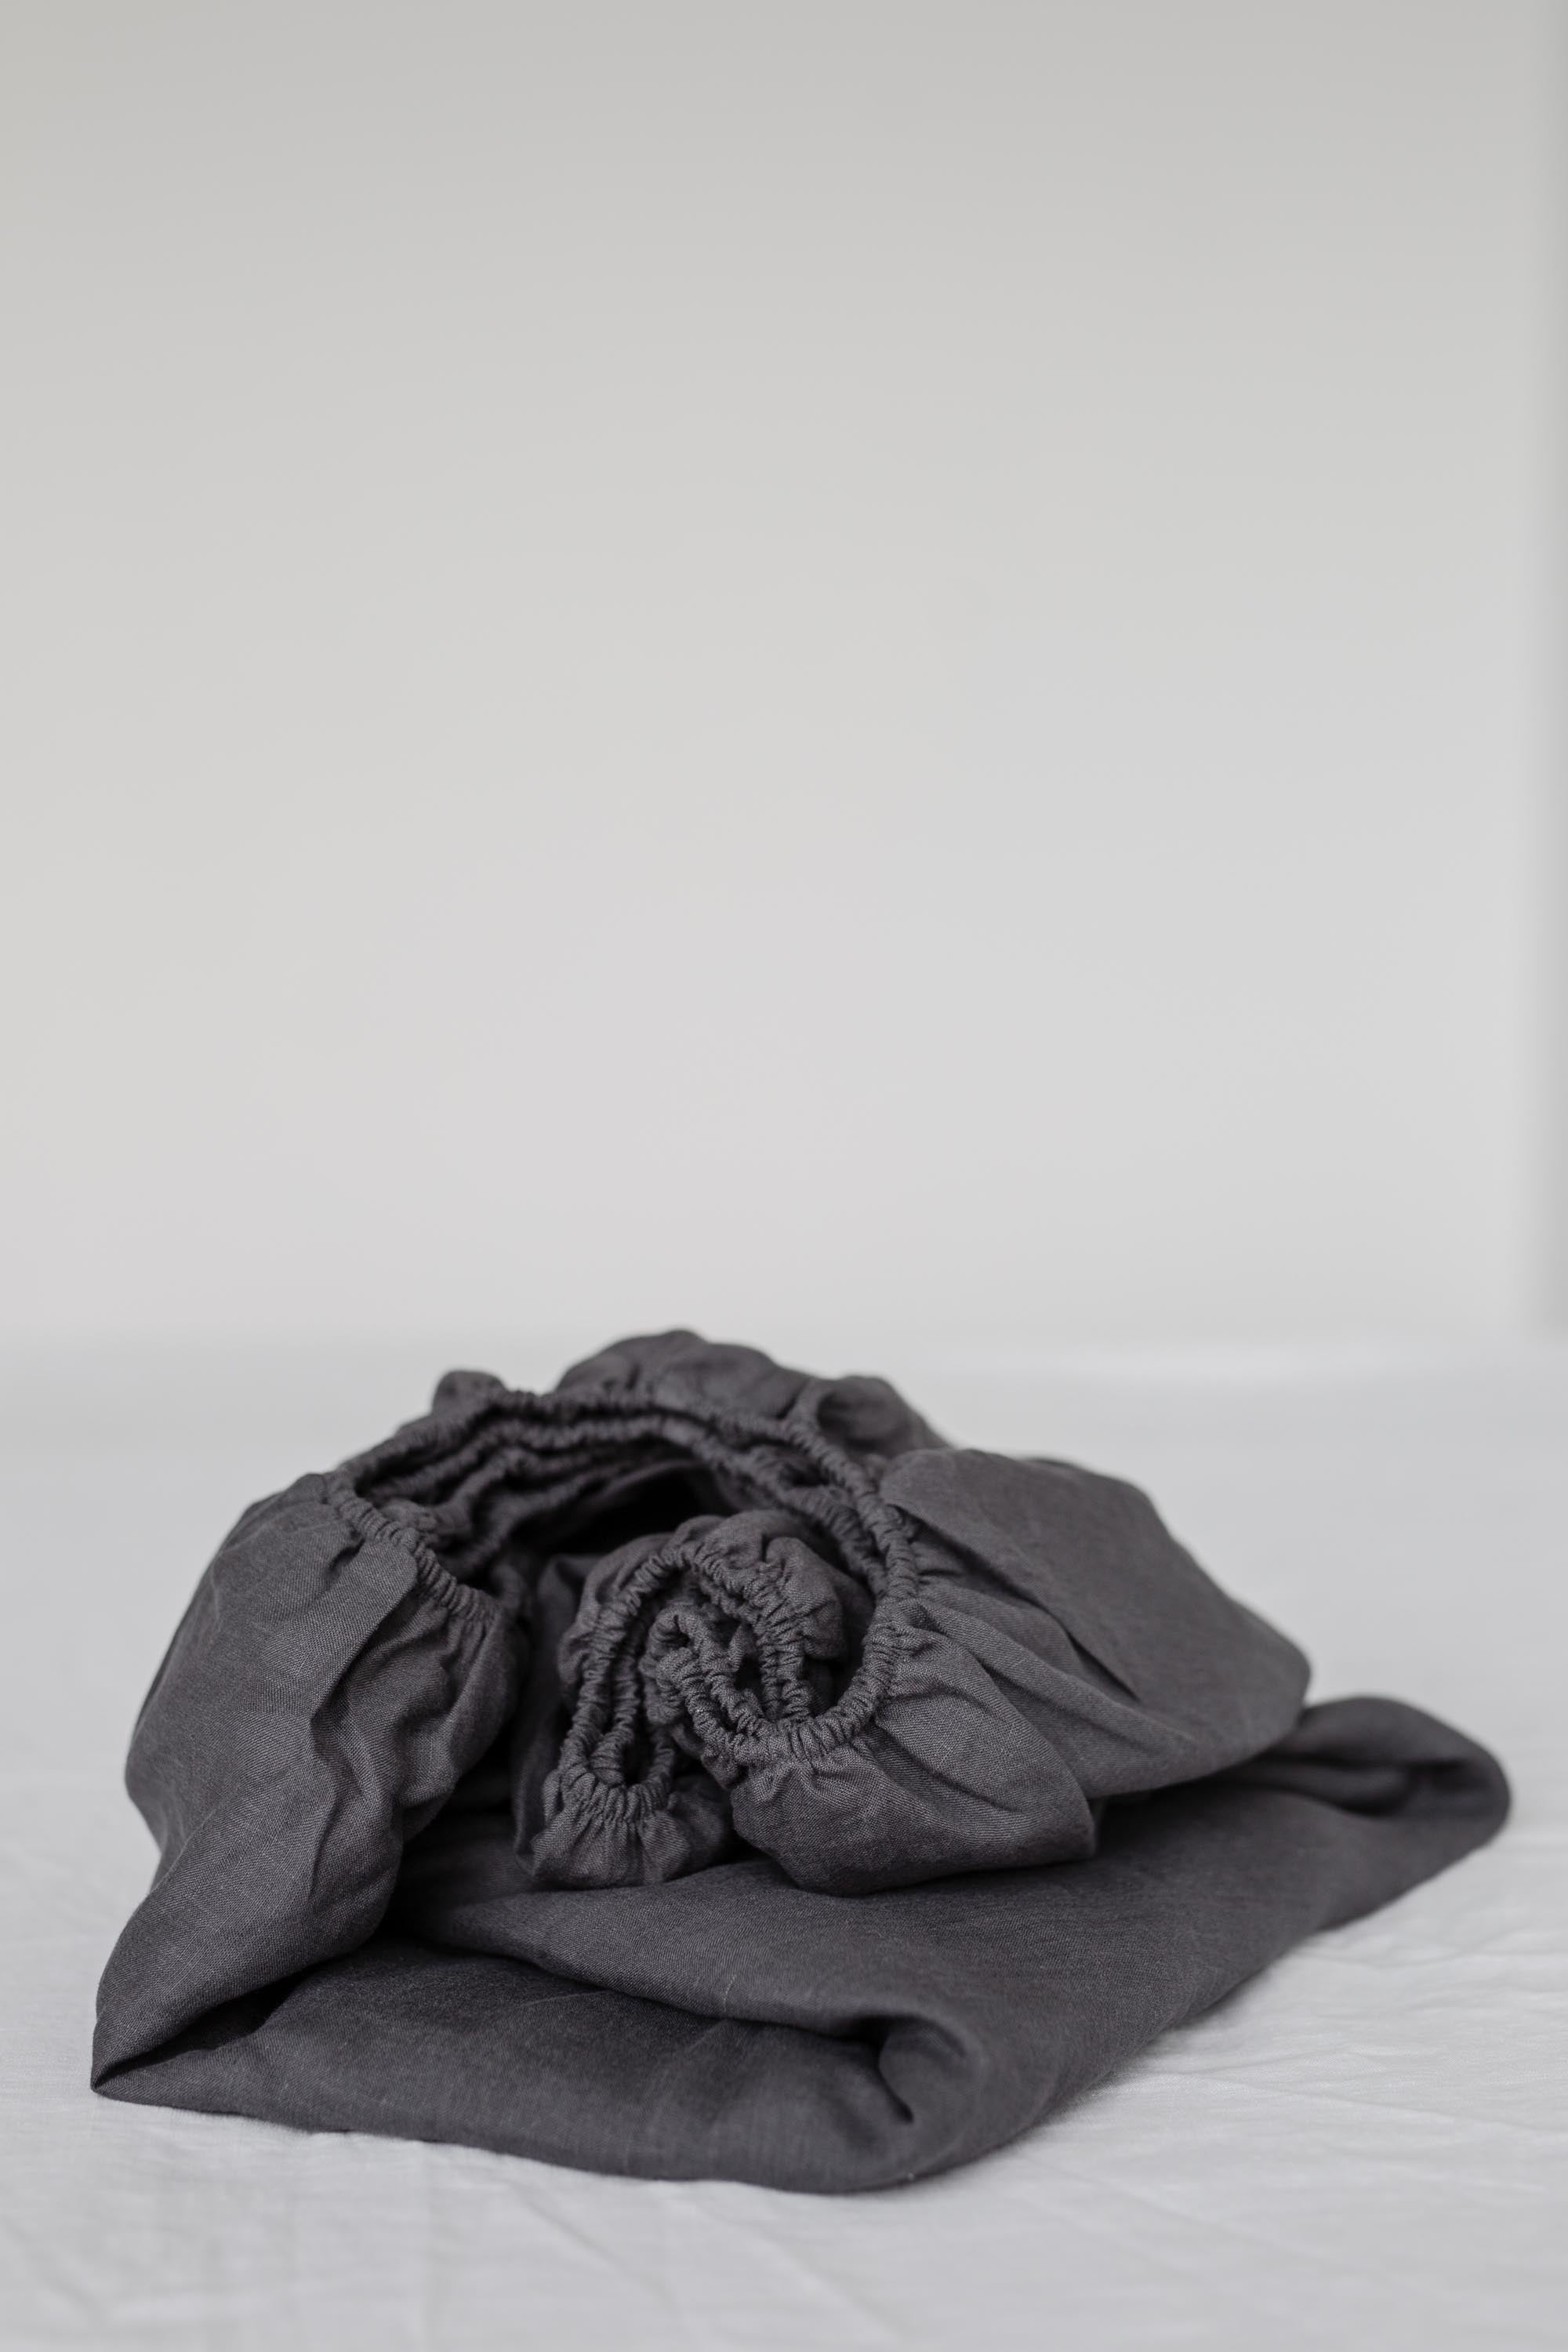 Charcoal Linen Fitted Sheet By AmourLinen